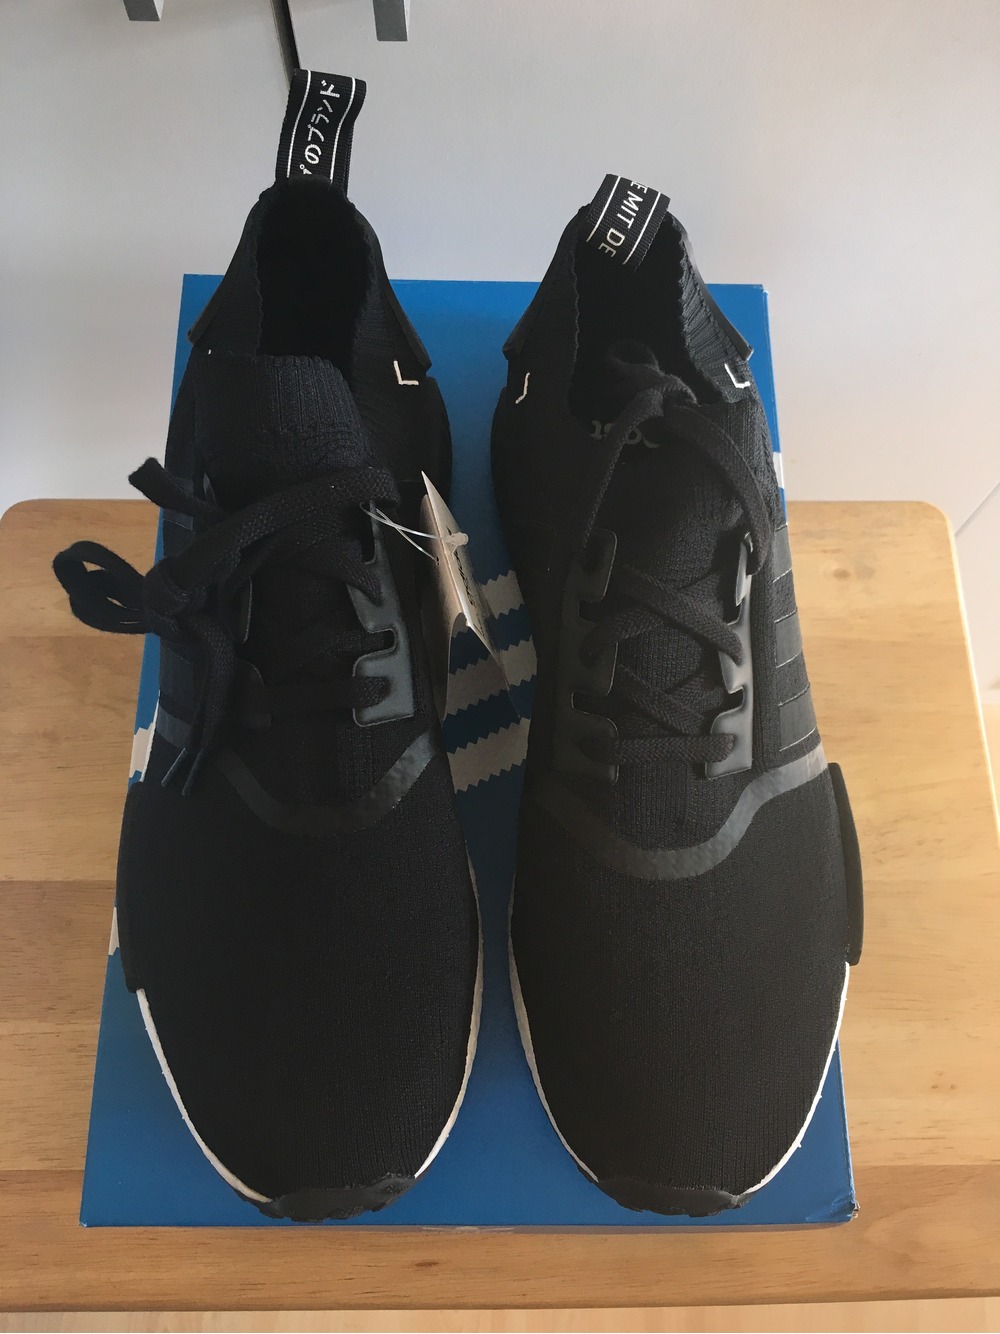 Gucci x Adidas NMD R1 Special Editionuk Shoes Bags